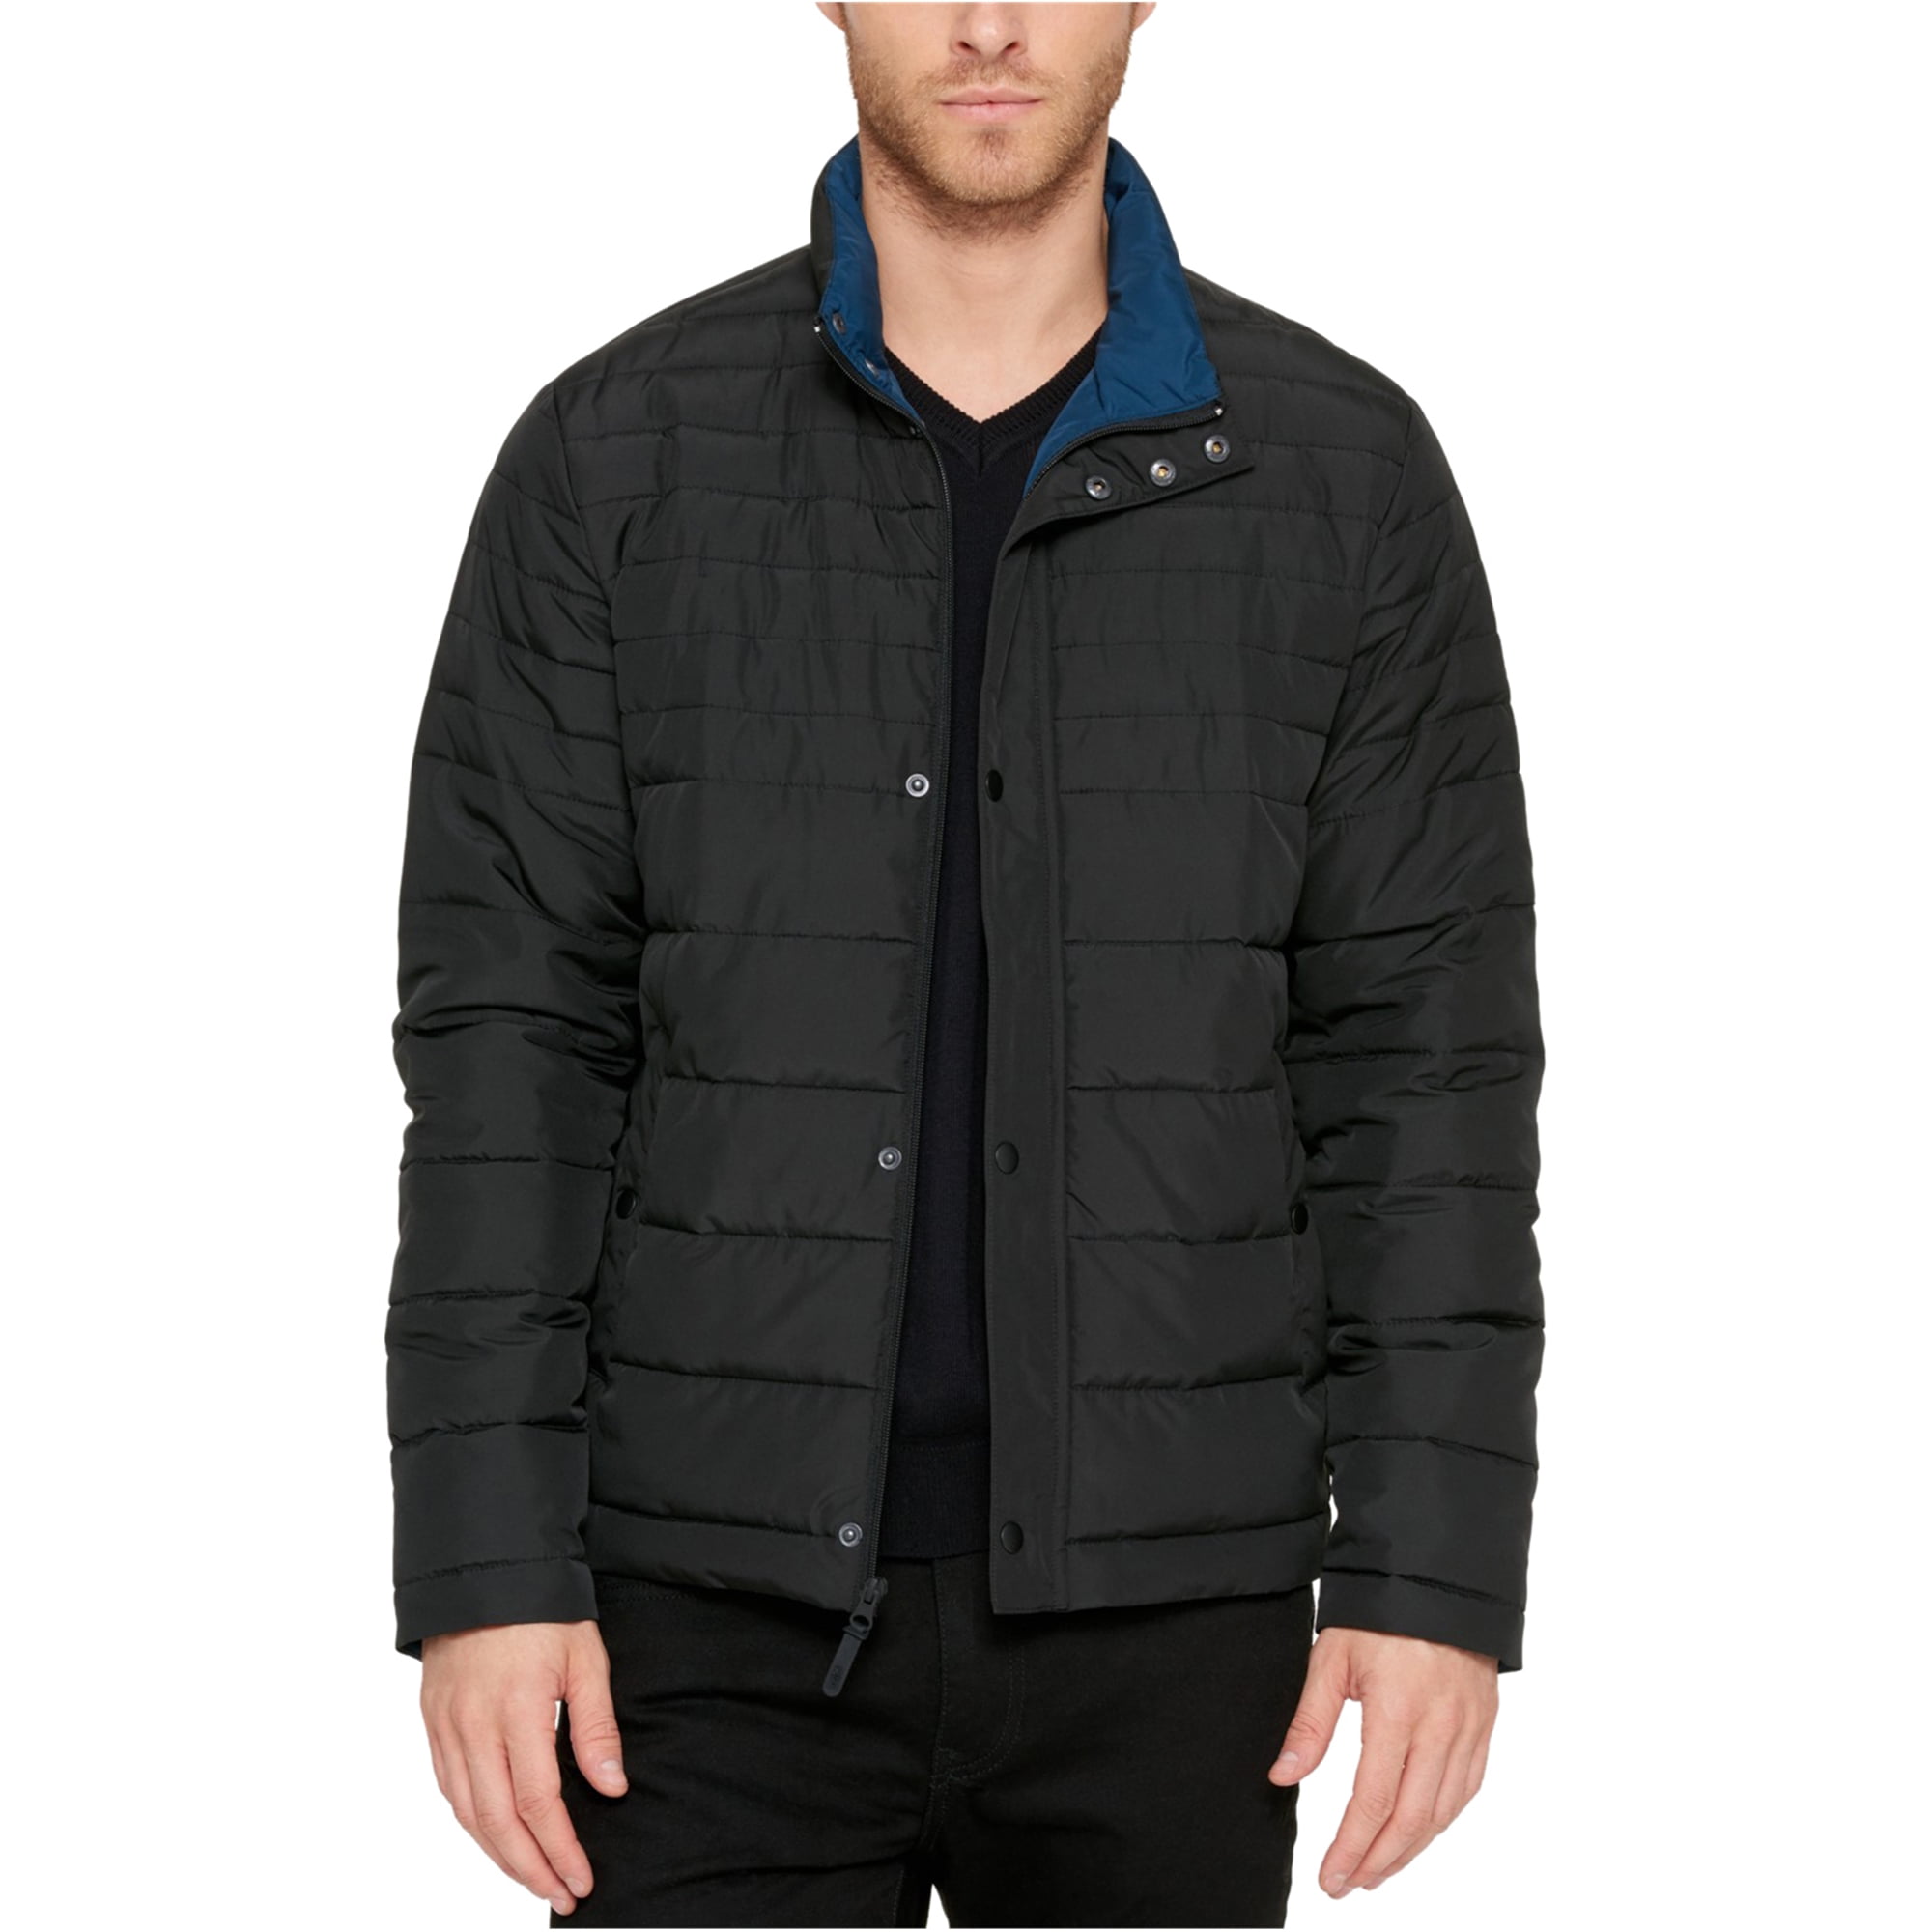 Kenneth Cole - Kenneth Cole Mens Packable Puffer Jacket, Black, Small ...